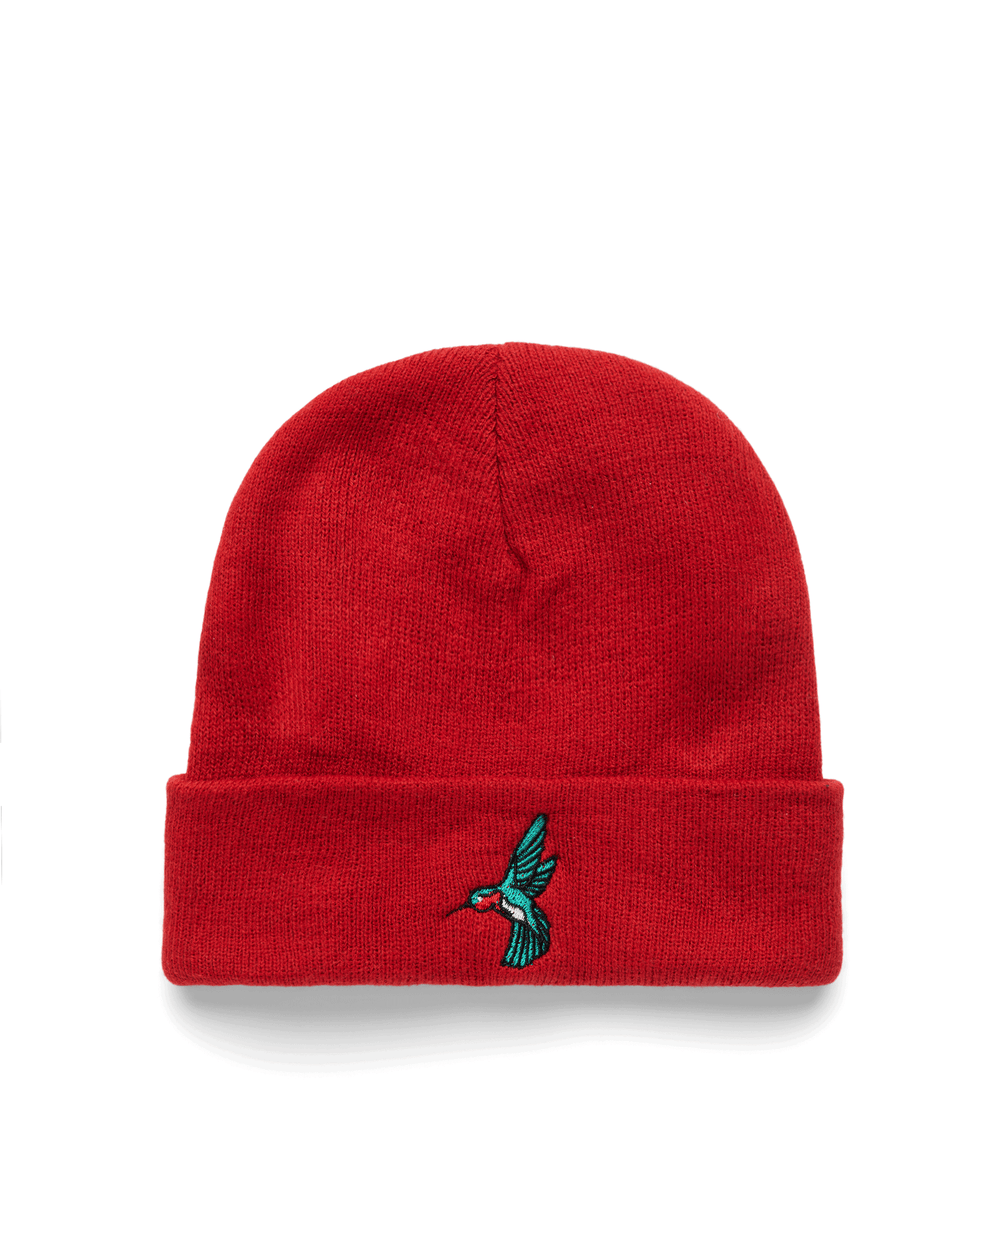 KNIT CUFFED BEANIE | HUMMINGBIRD EMBROIDERED | ARTISANAL RED